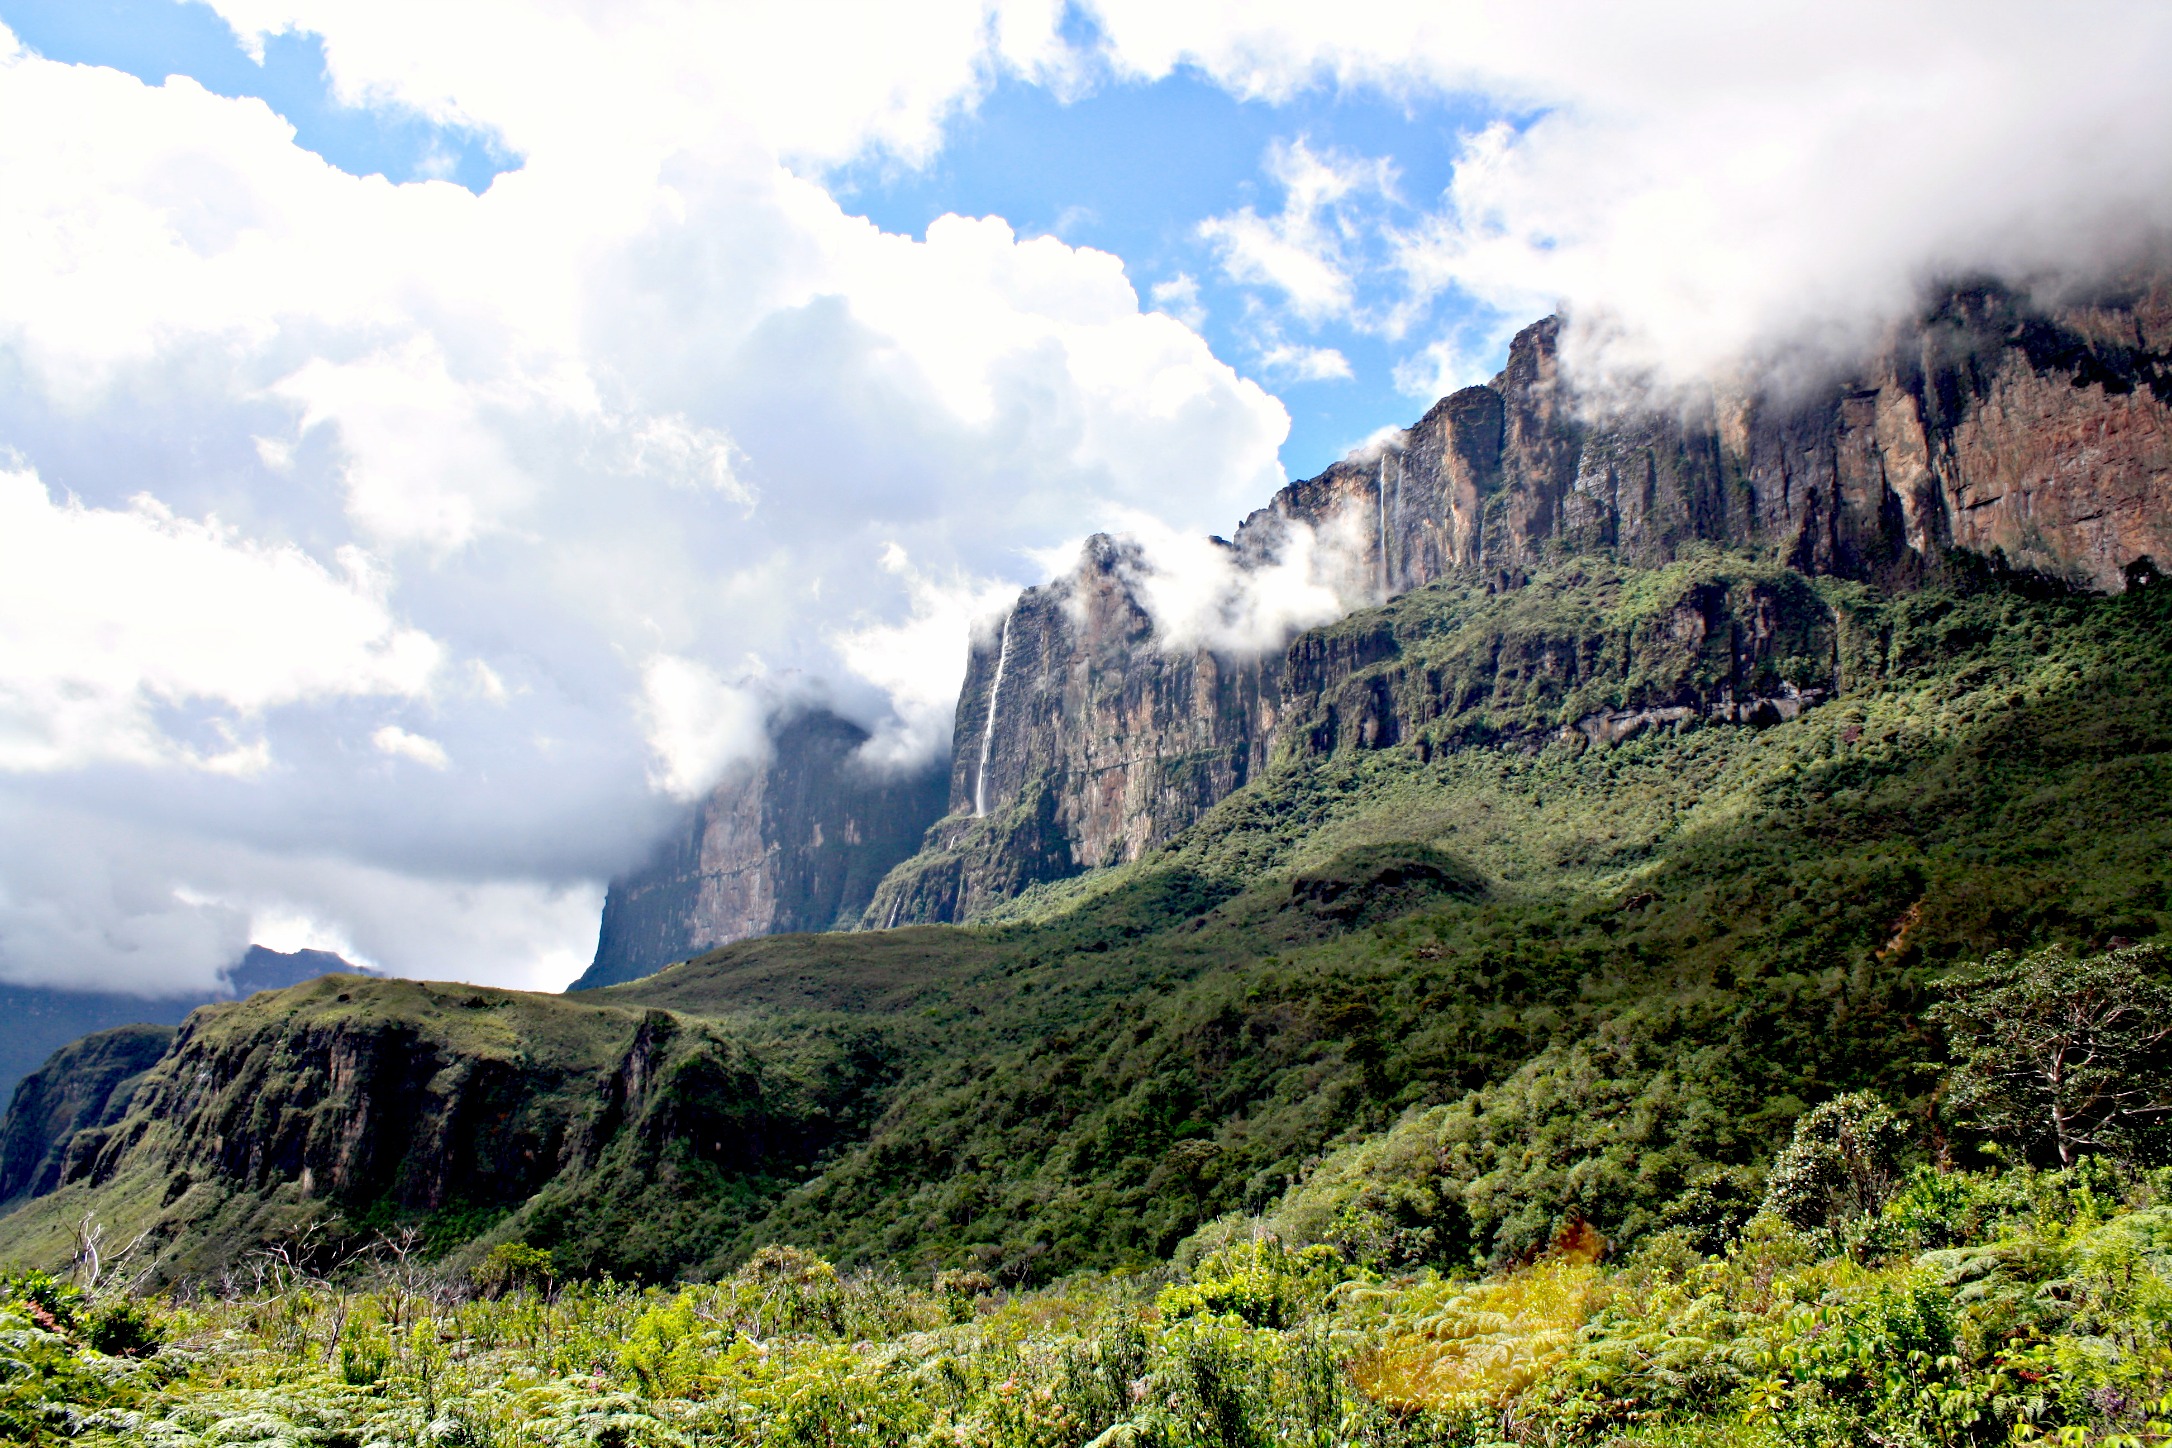 Our first glimpse of Mount Roraima